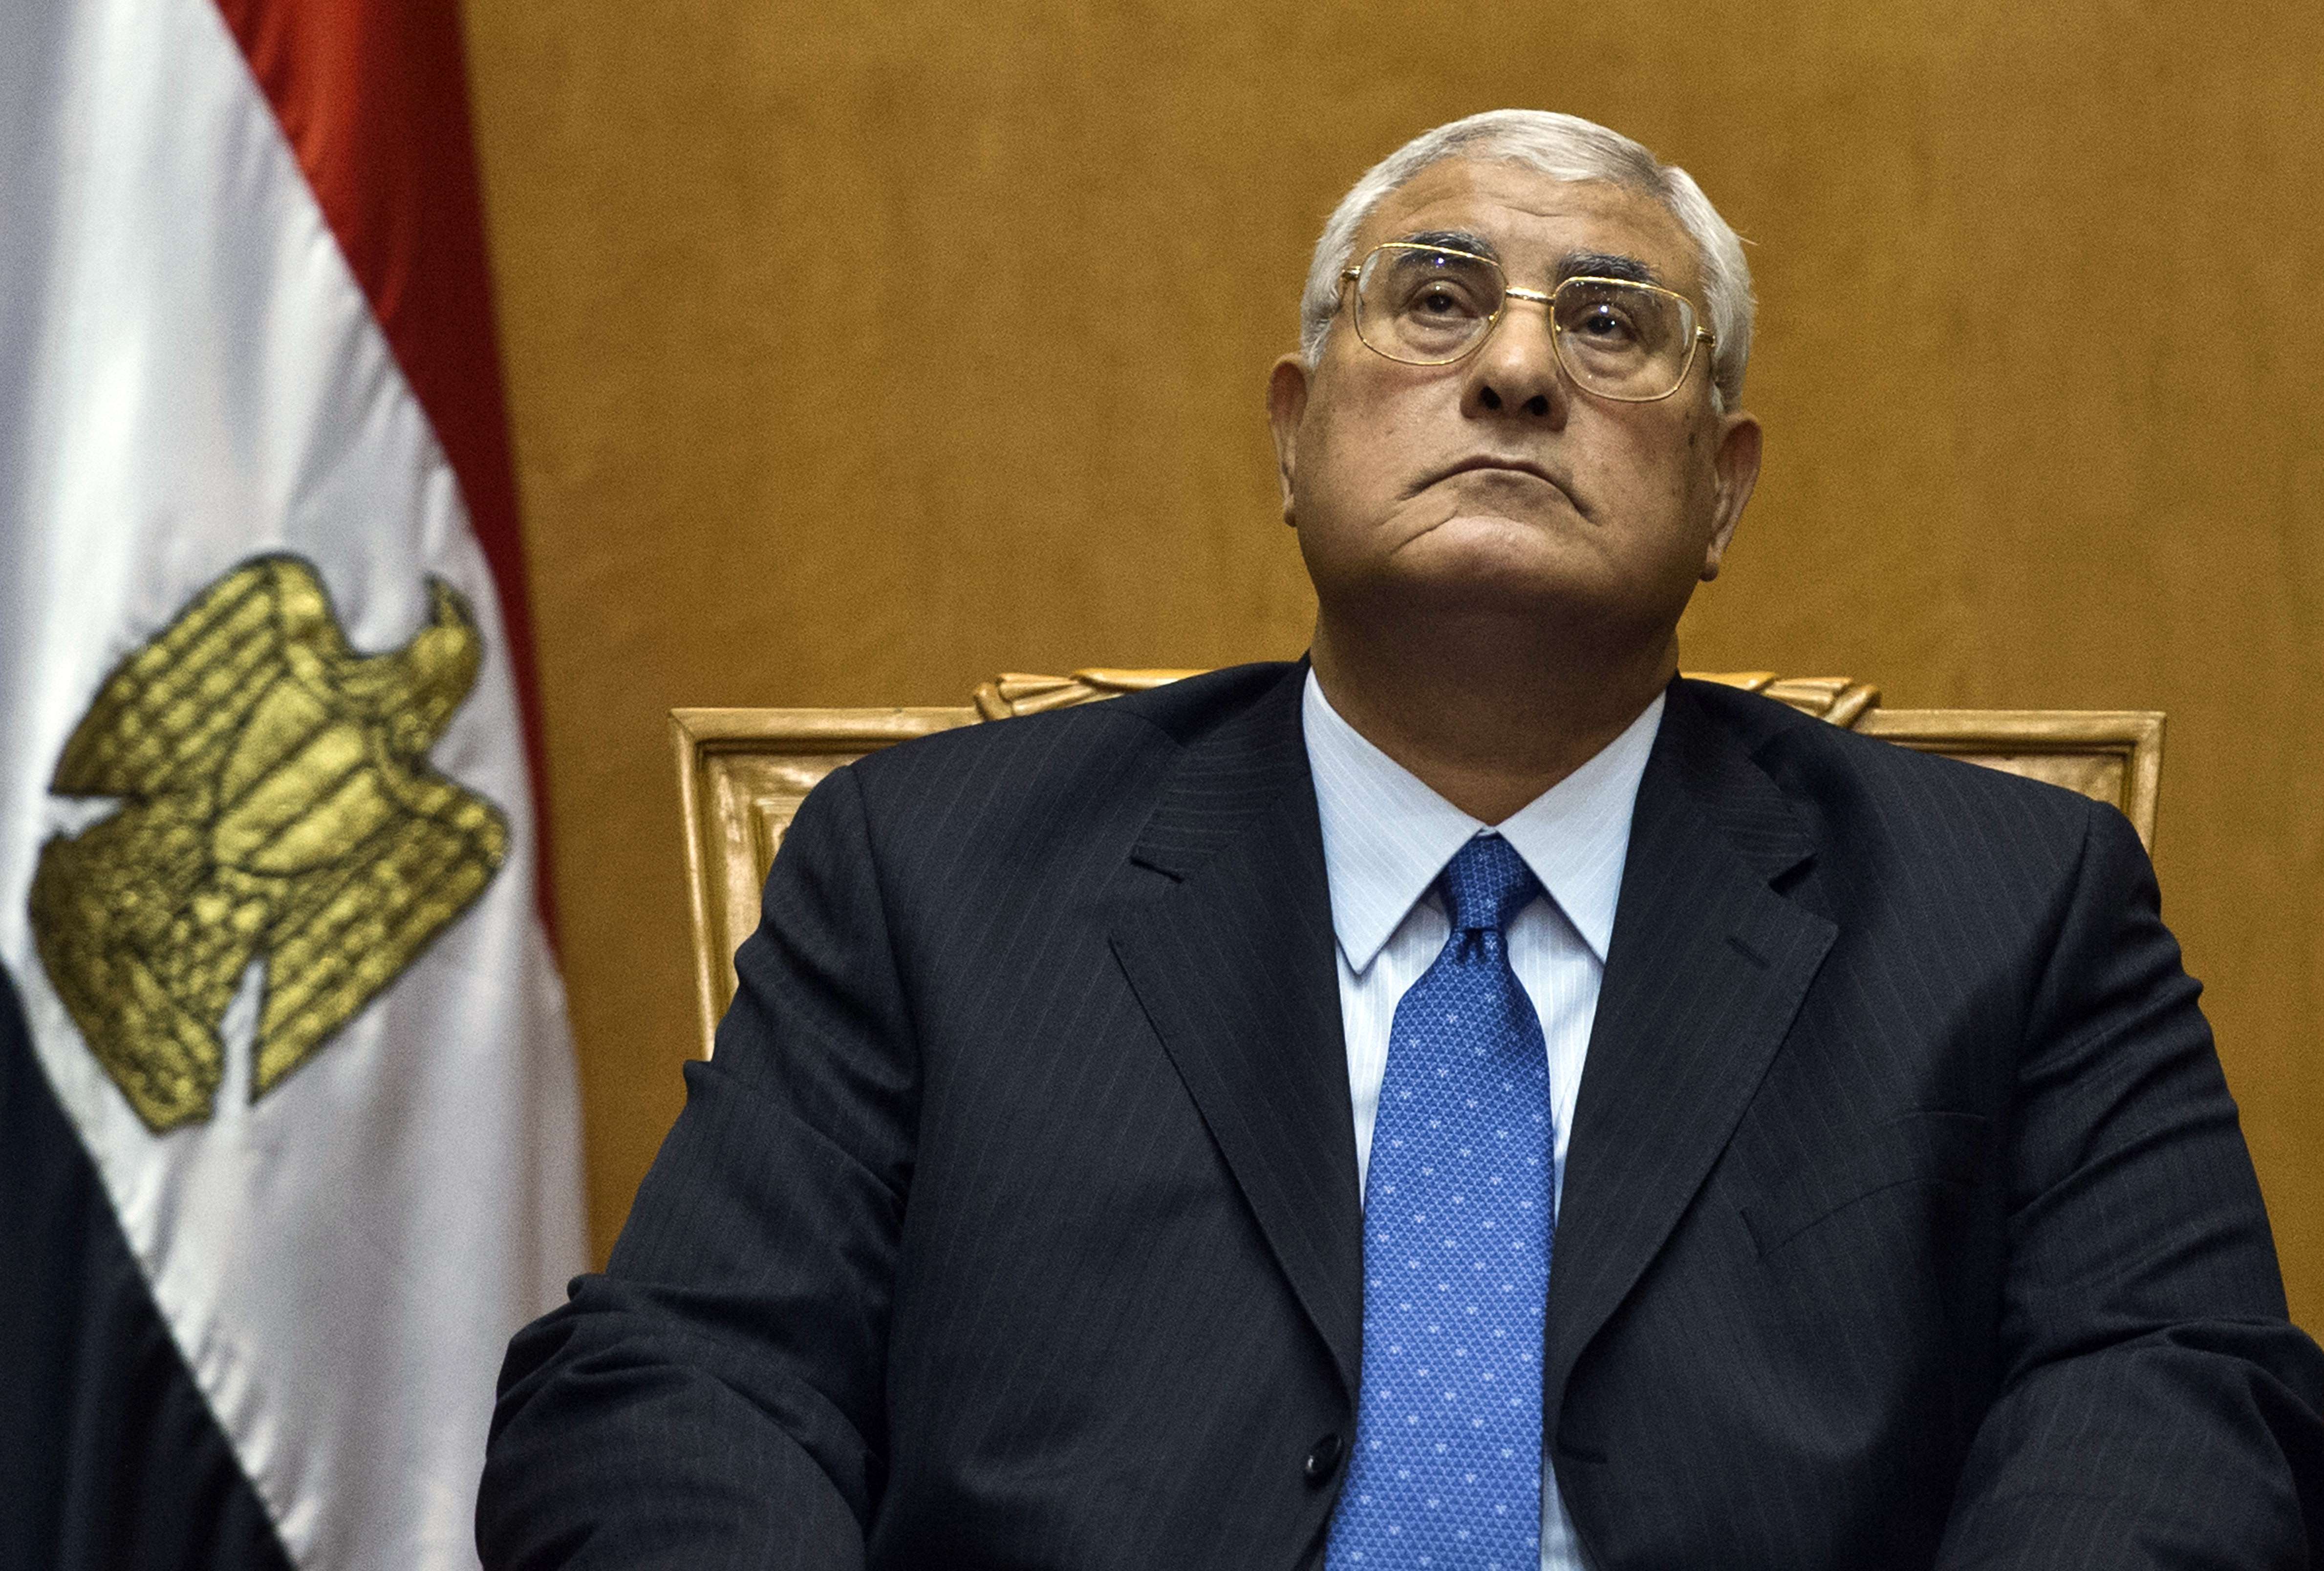 Egypt: Constitutional committee wants new Presidential mandate